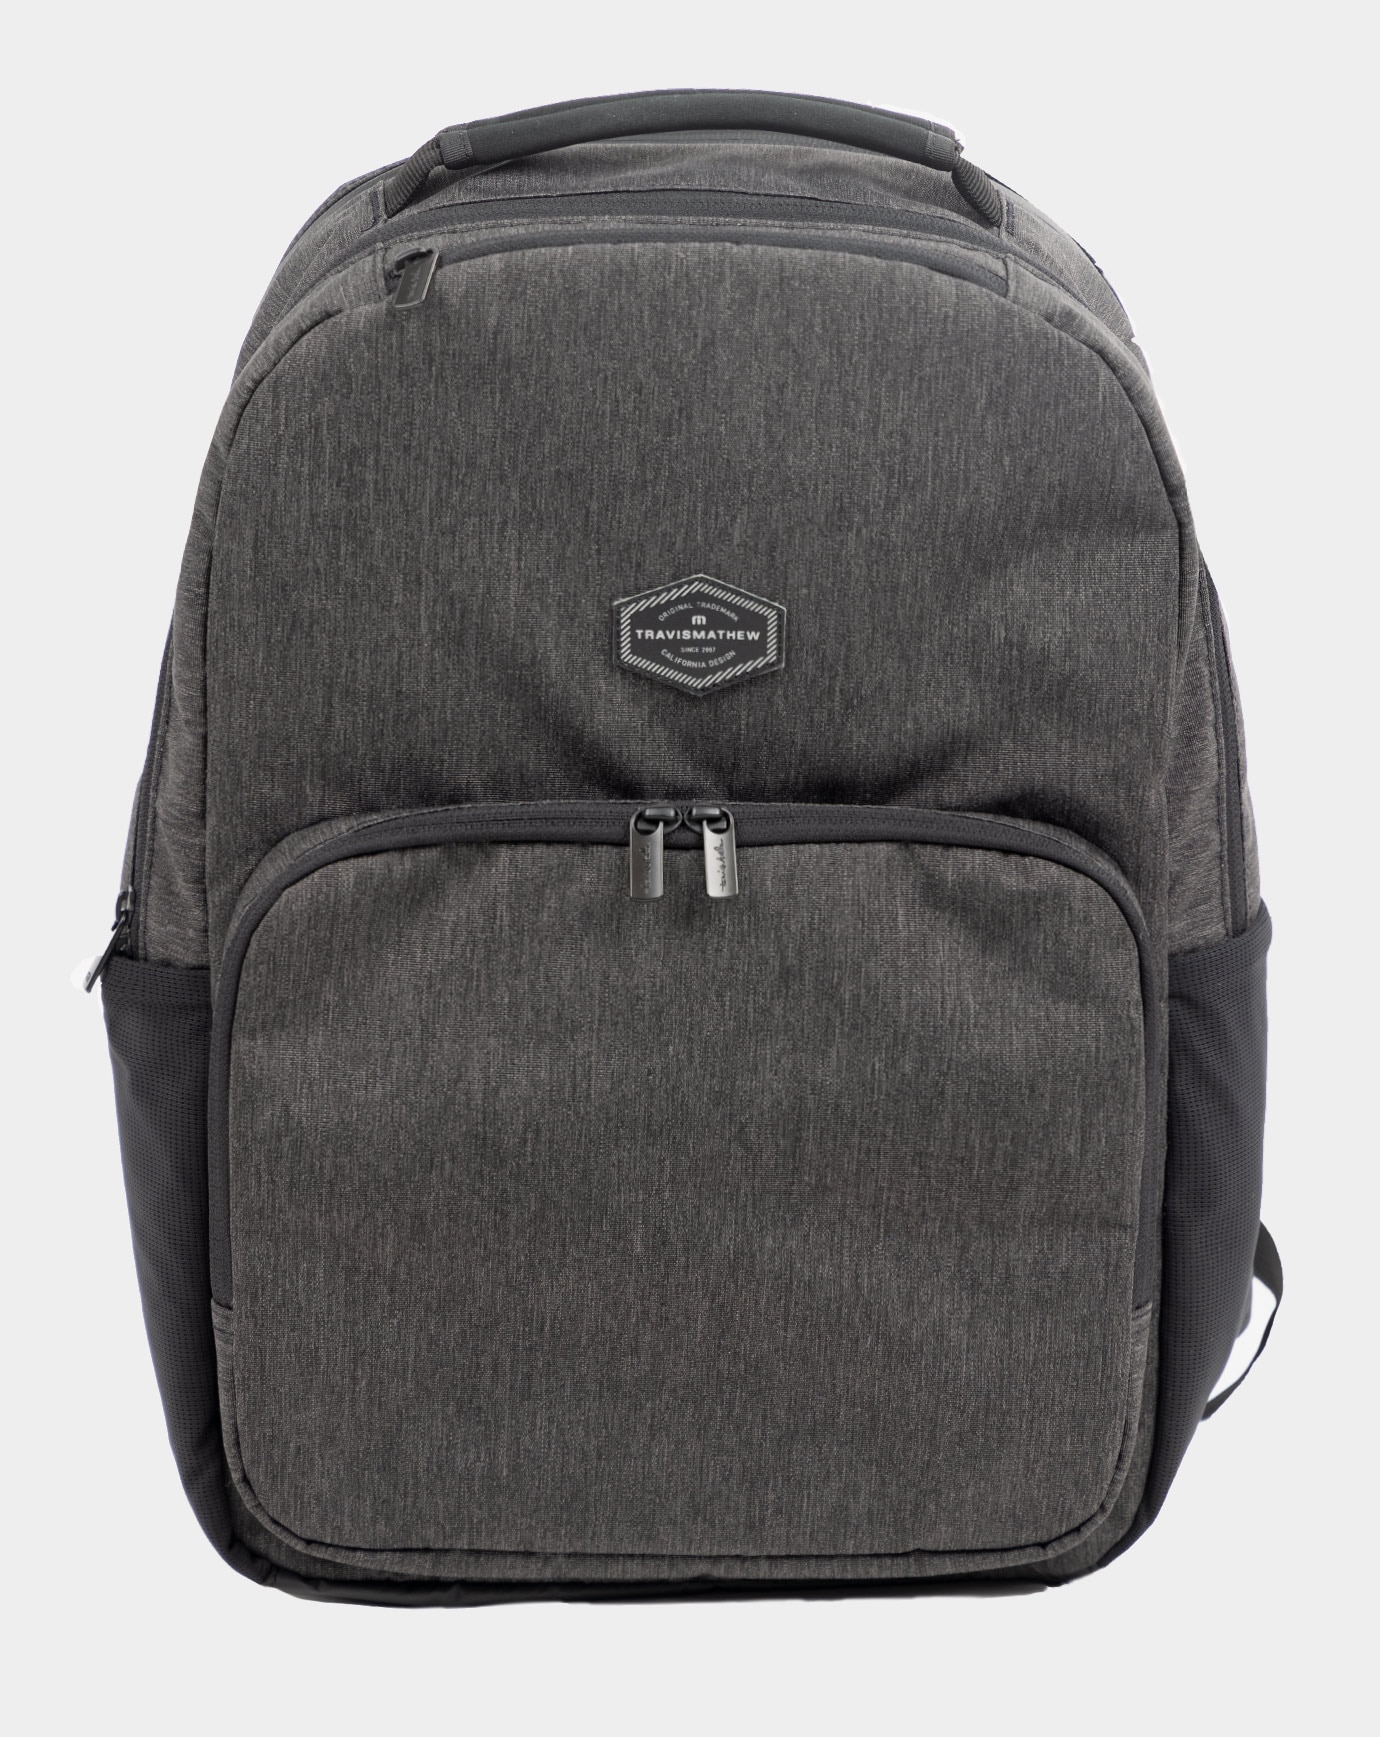 STEADYPACK BACKPACK Image Thumbnail 1